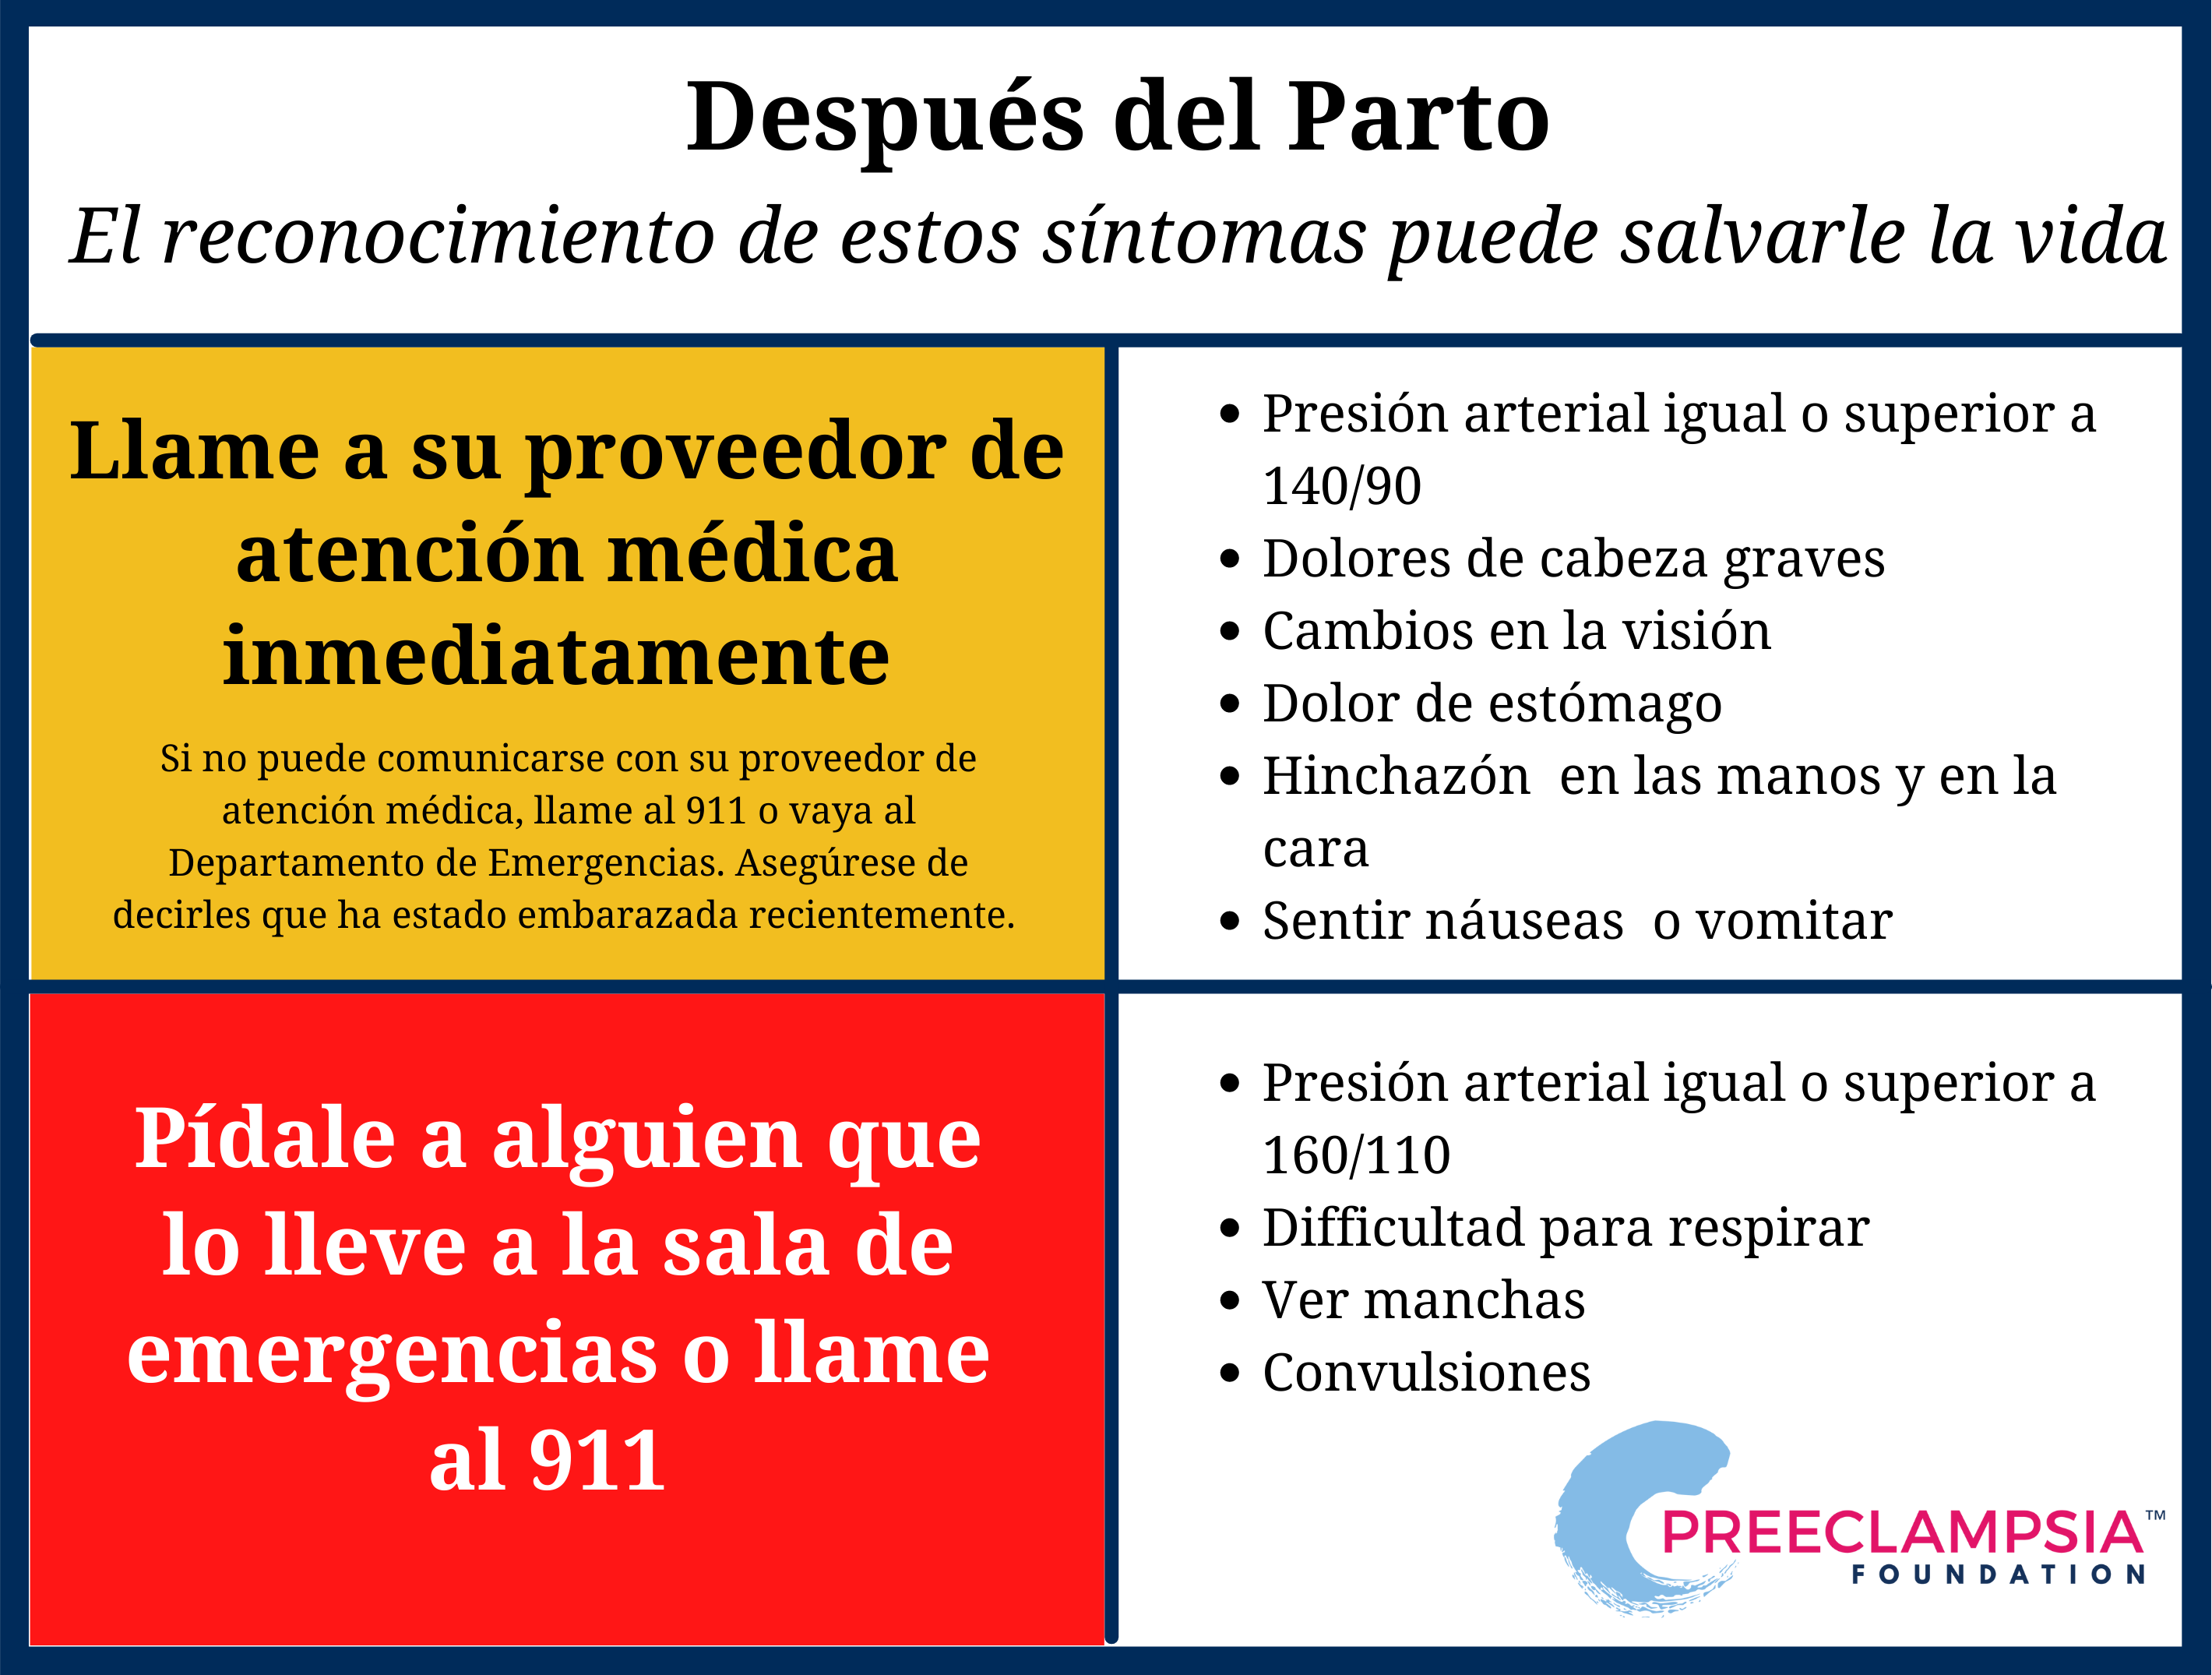 After Delivery Warning Signs graphic (Spanish).png (537 KB)